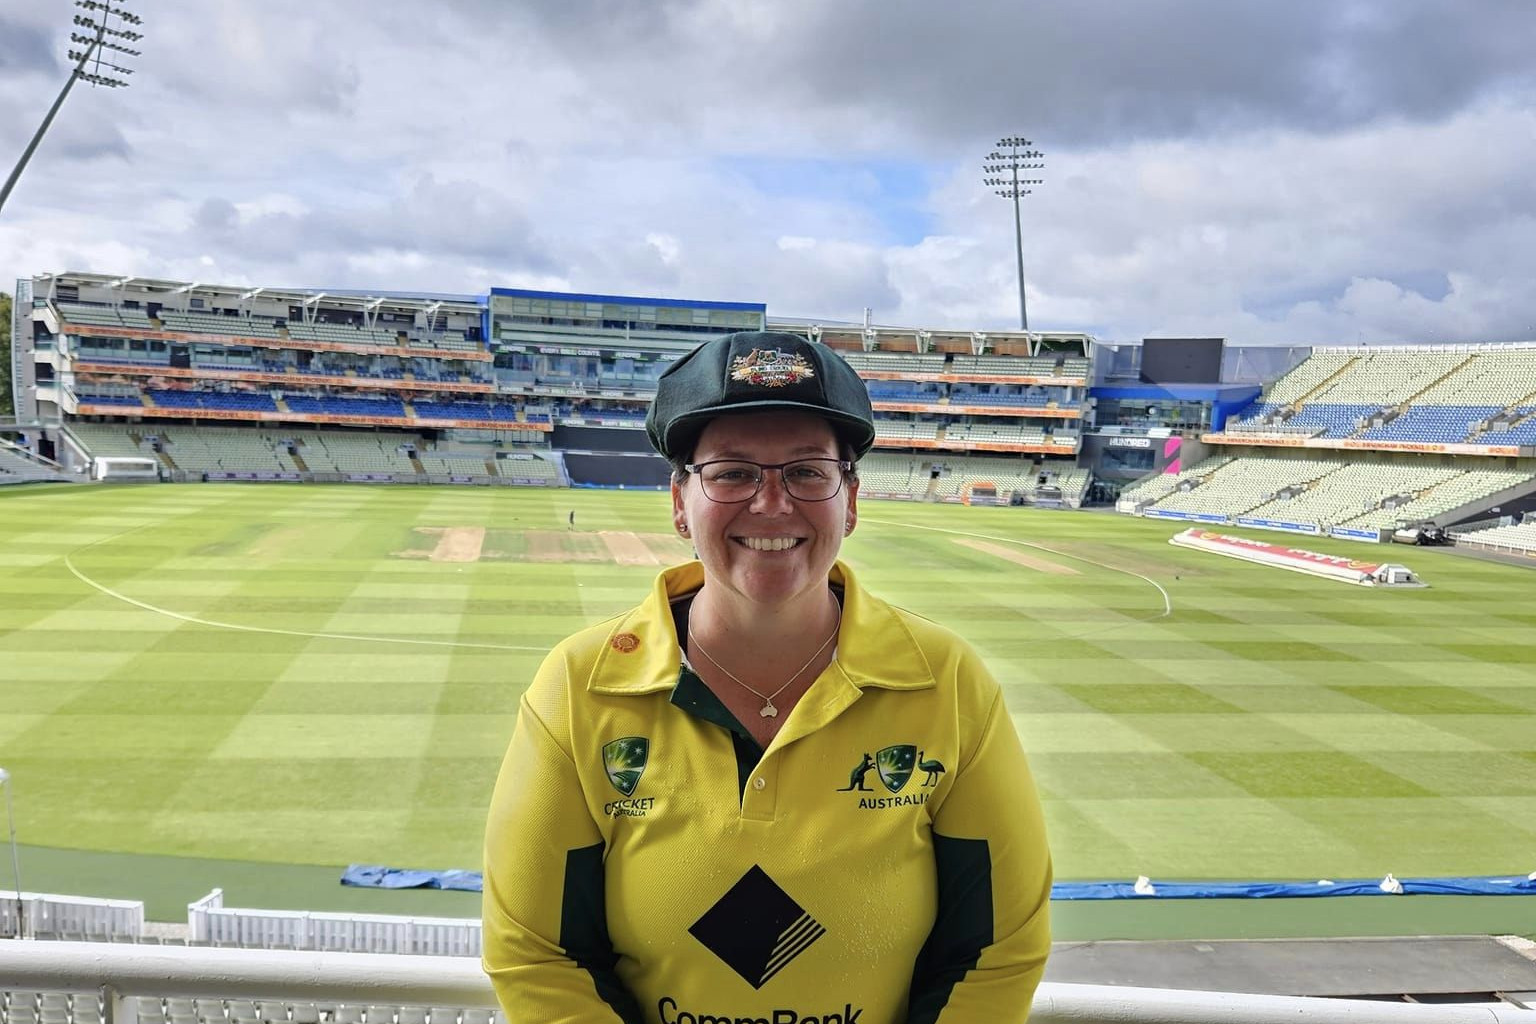 Fernvale resident Nicole Rowling represented Australia in blind cricket at the World Blind Games in England, with Australia finishing runner-up to India in the women’s grand final at Edgbaston Stadium.